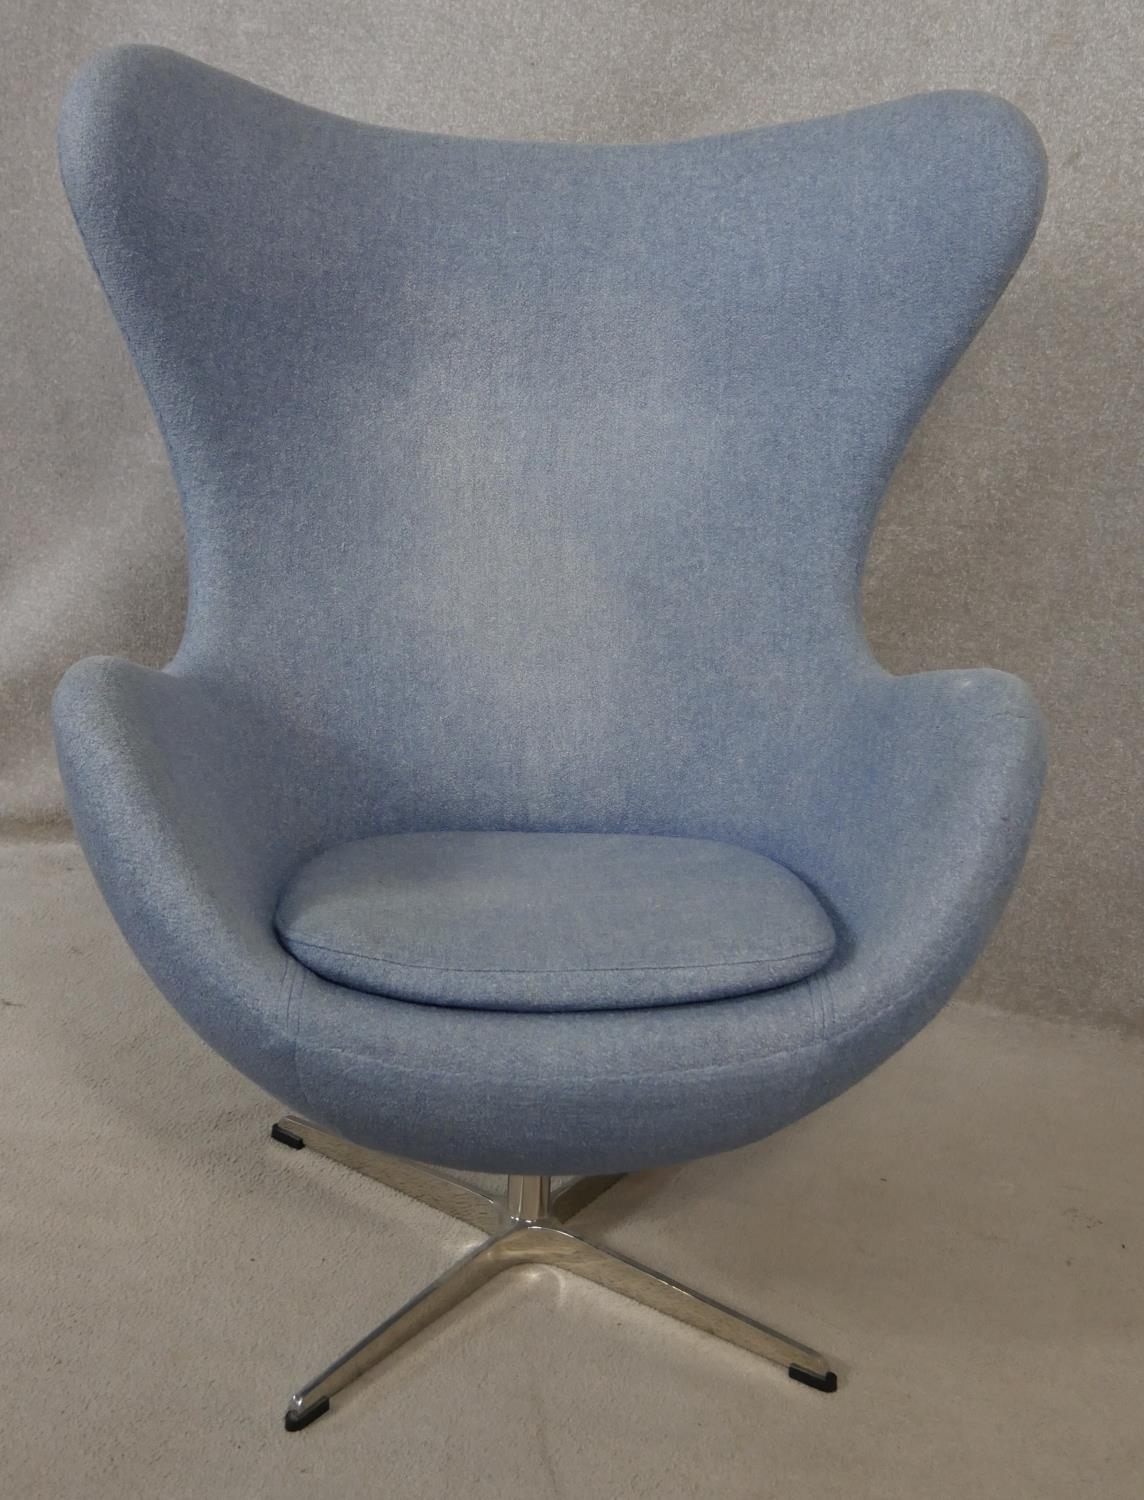 After Arne Jacobsen (1902-1971) Egg chair in pale blue upholstery and rise and fall action on four